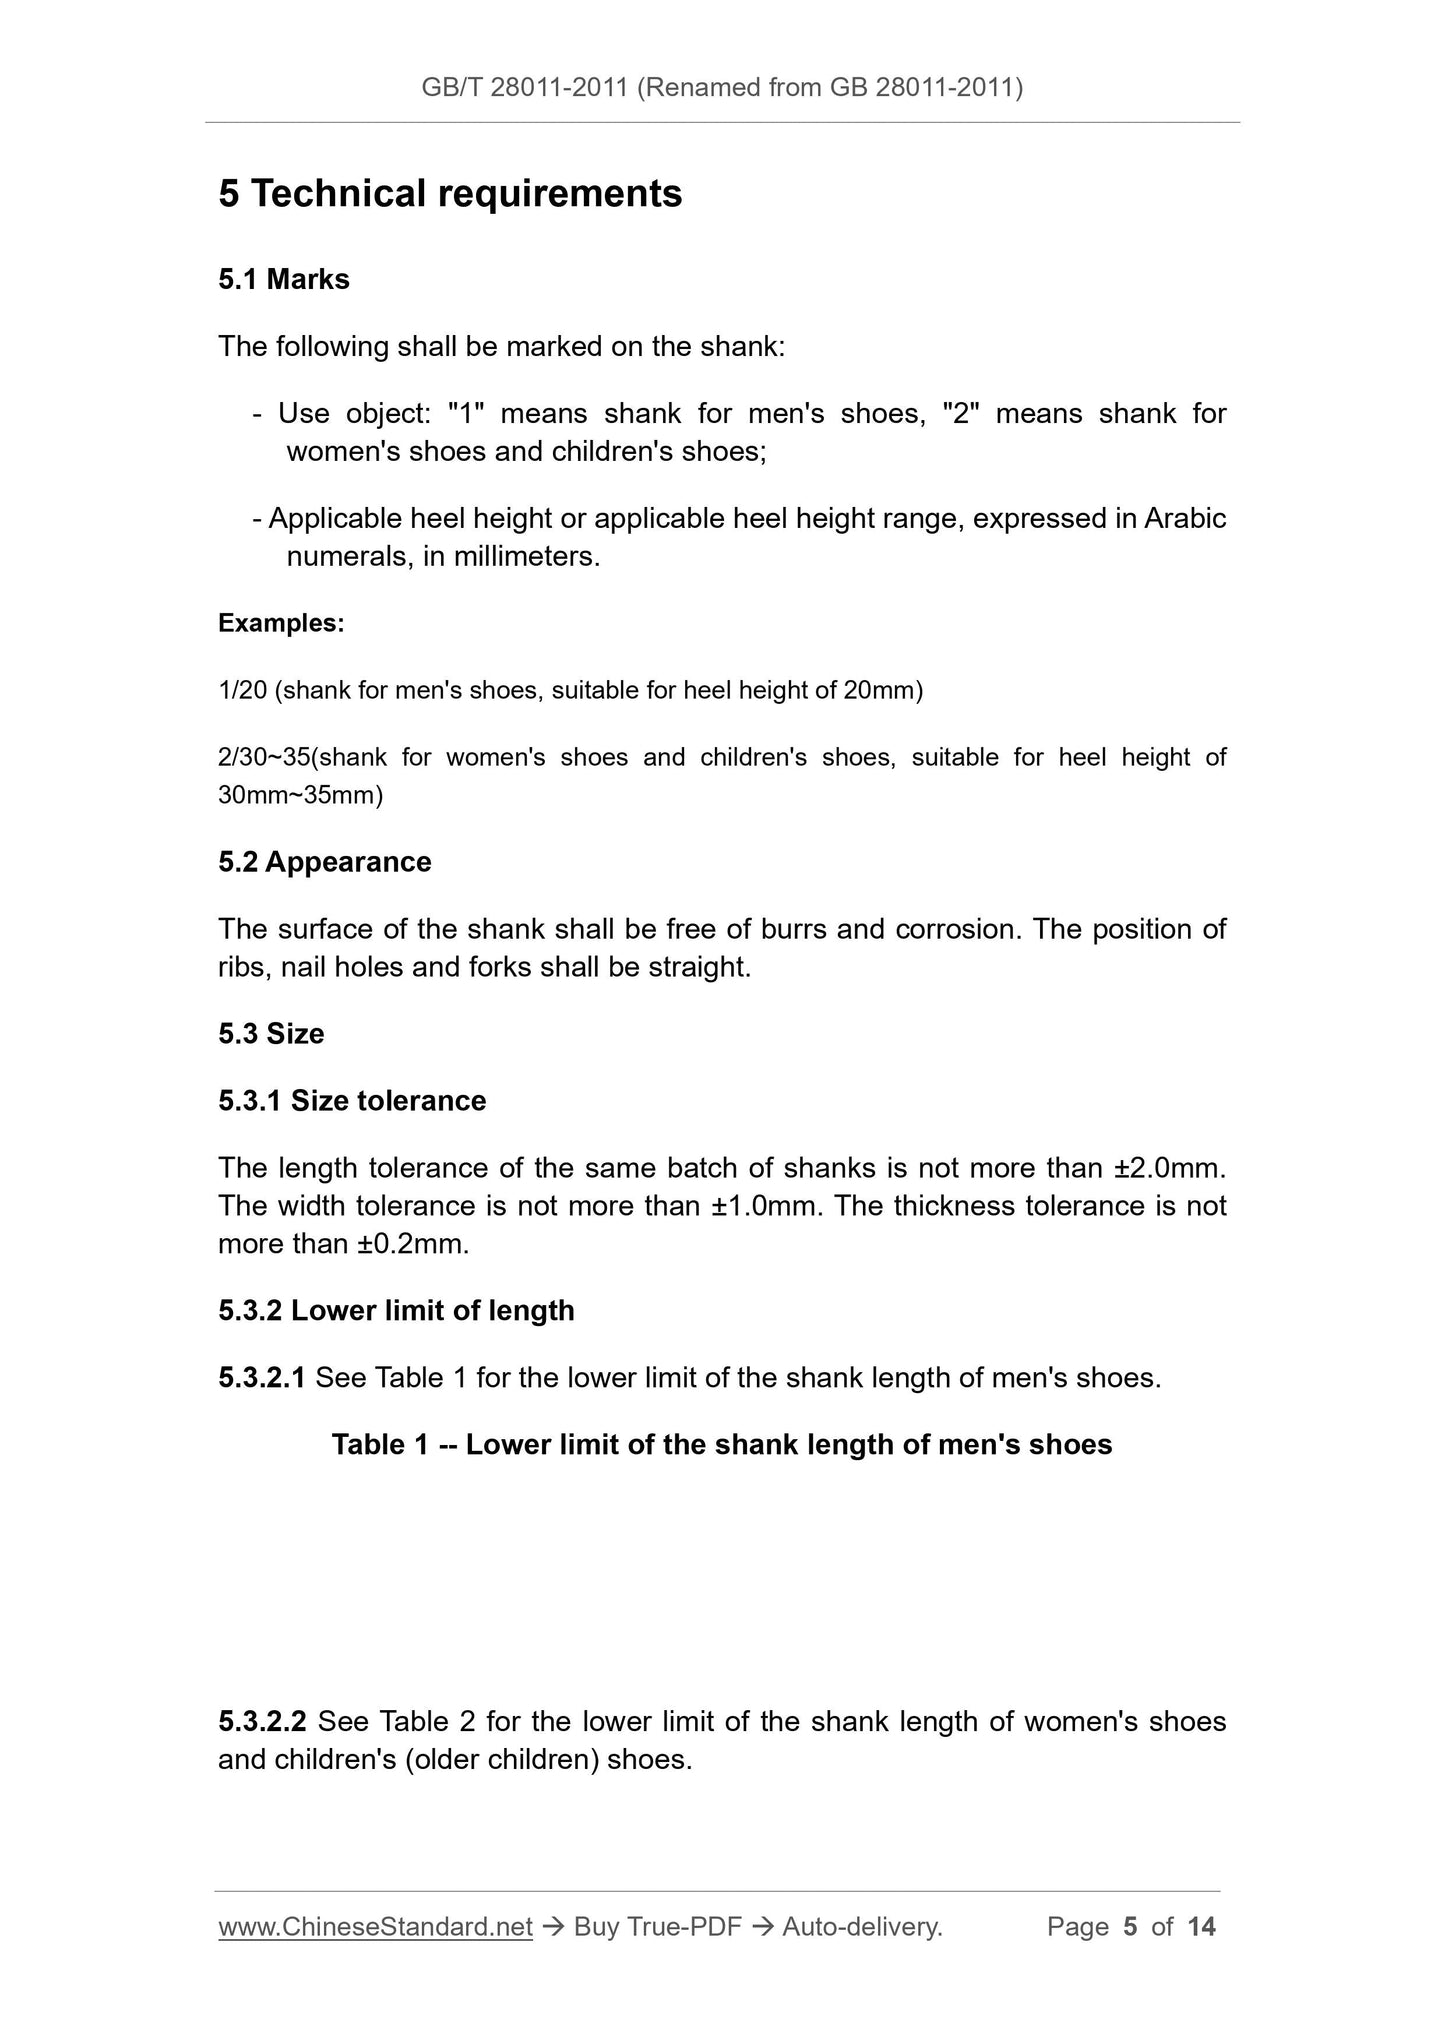 GB 28011-2011 Page 4